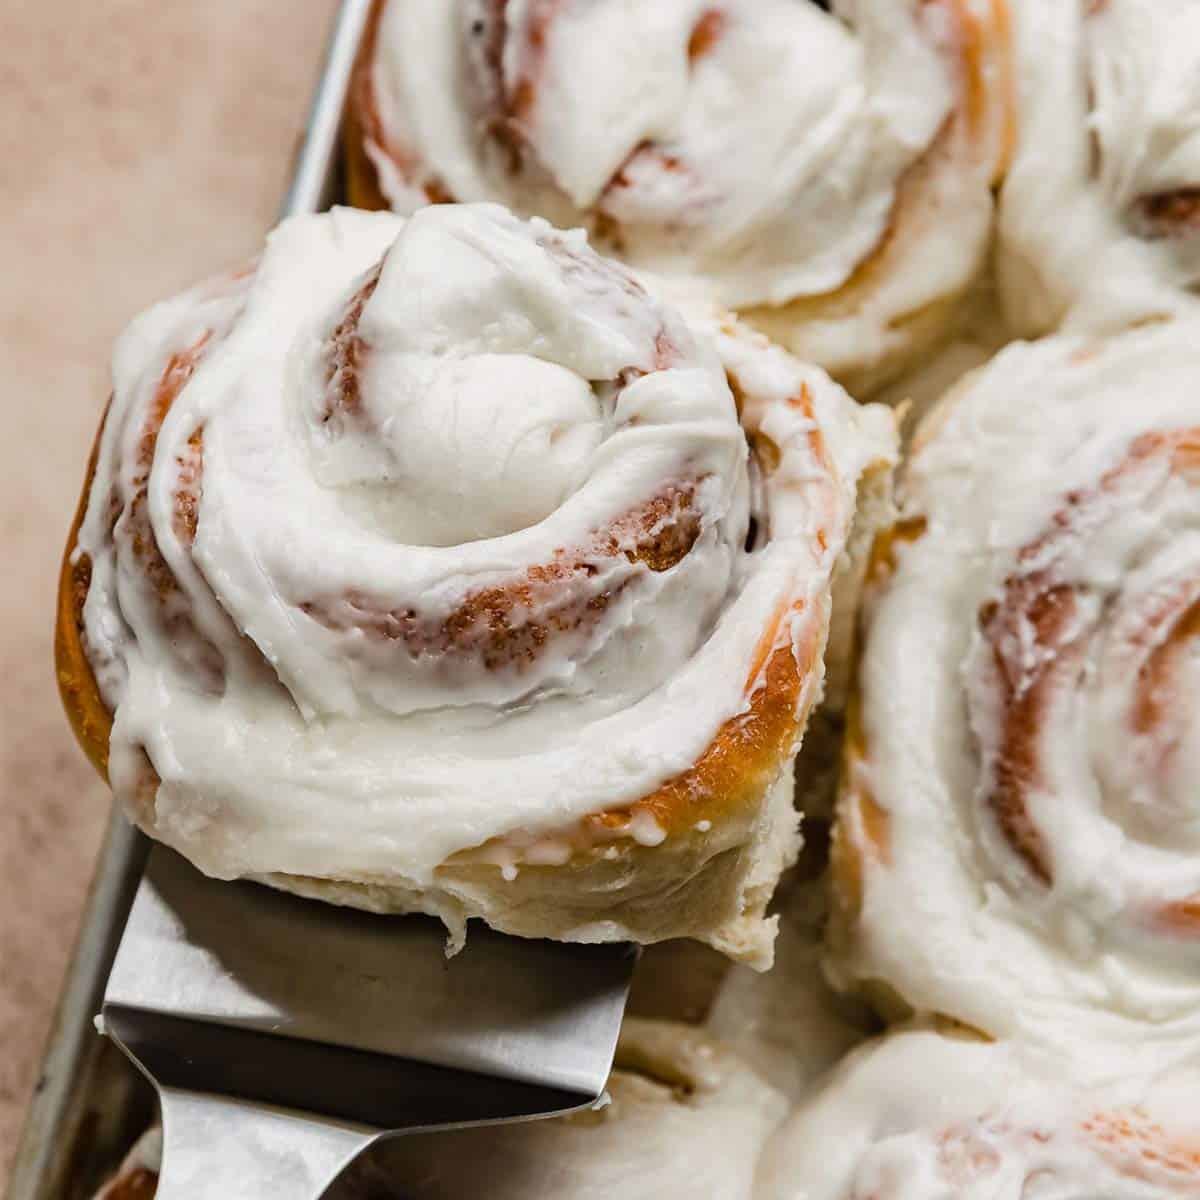 A close up of a vanilla frosting cinnamon roll.